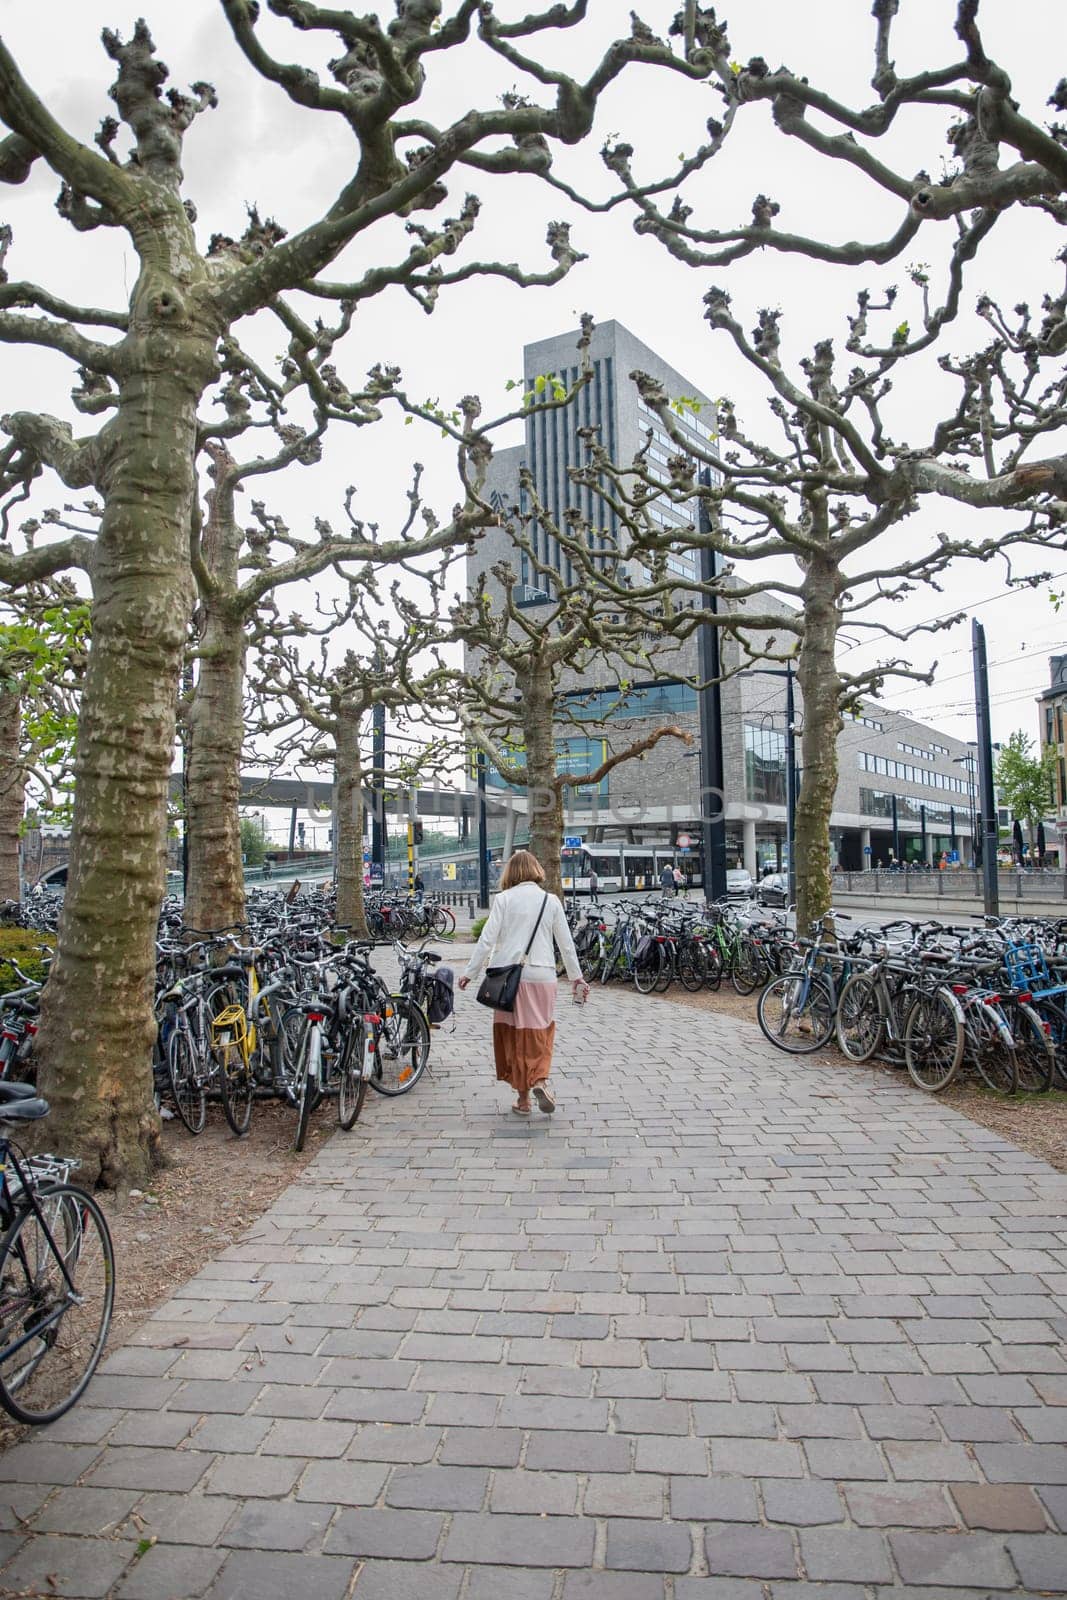 Ghent, Belgium, May 5, 2022: Virginie Loveling Building, Flemish Community Center,parking lot with bicycles in city by KaterinaDalemans